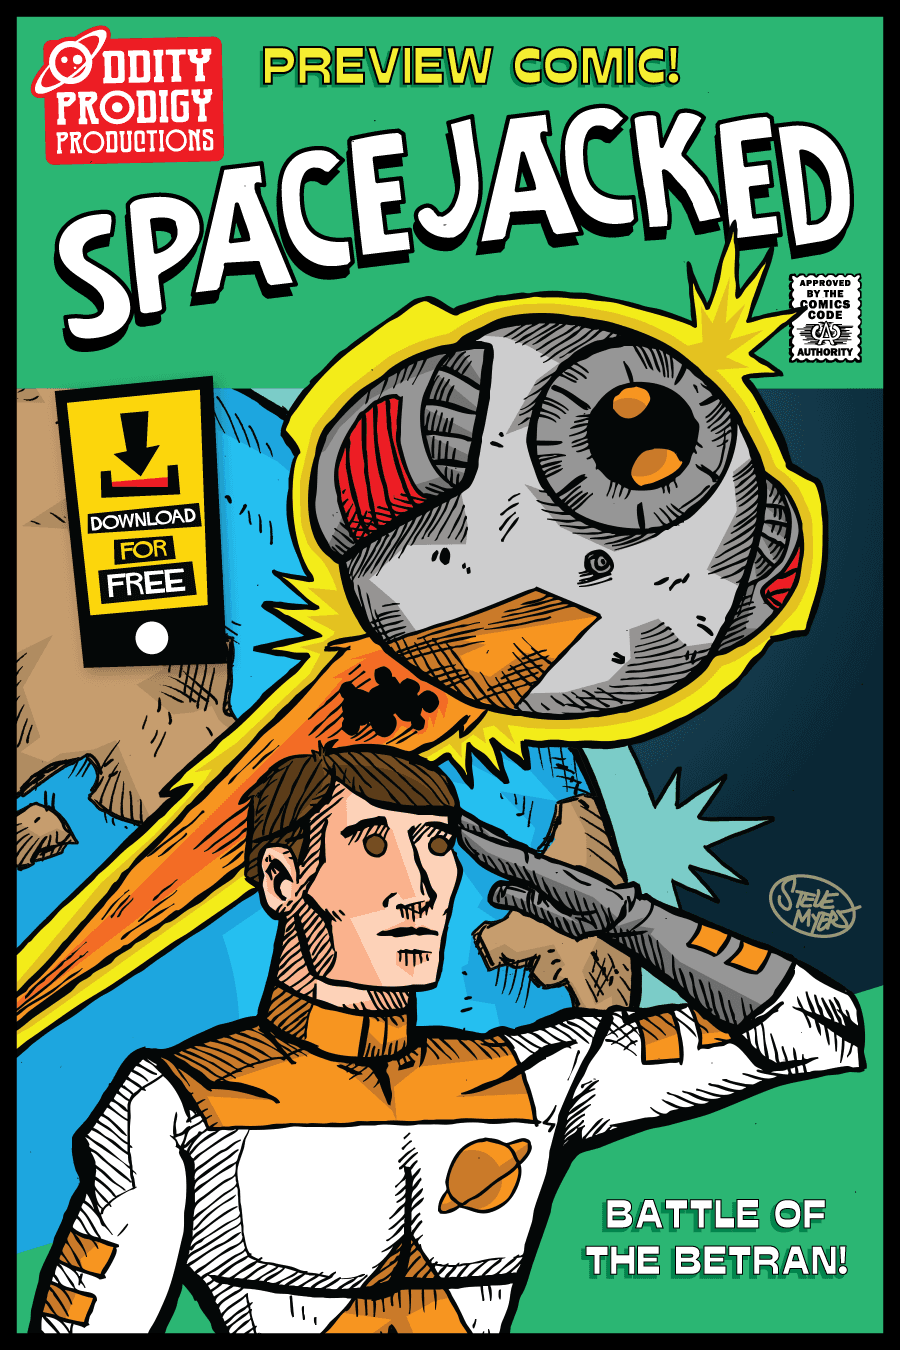 Spacejacked Preview Comic